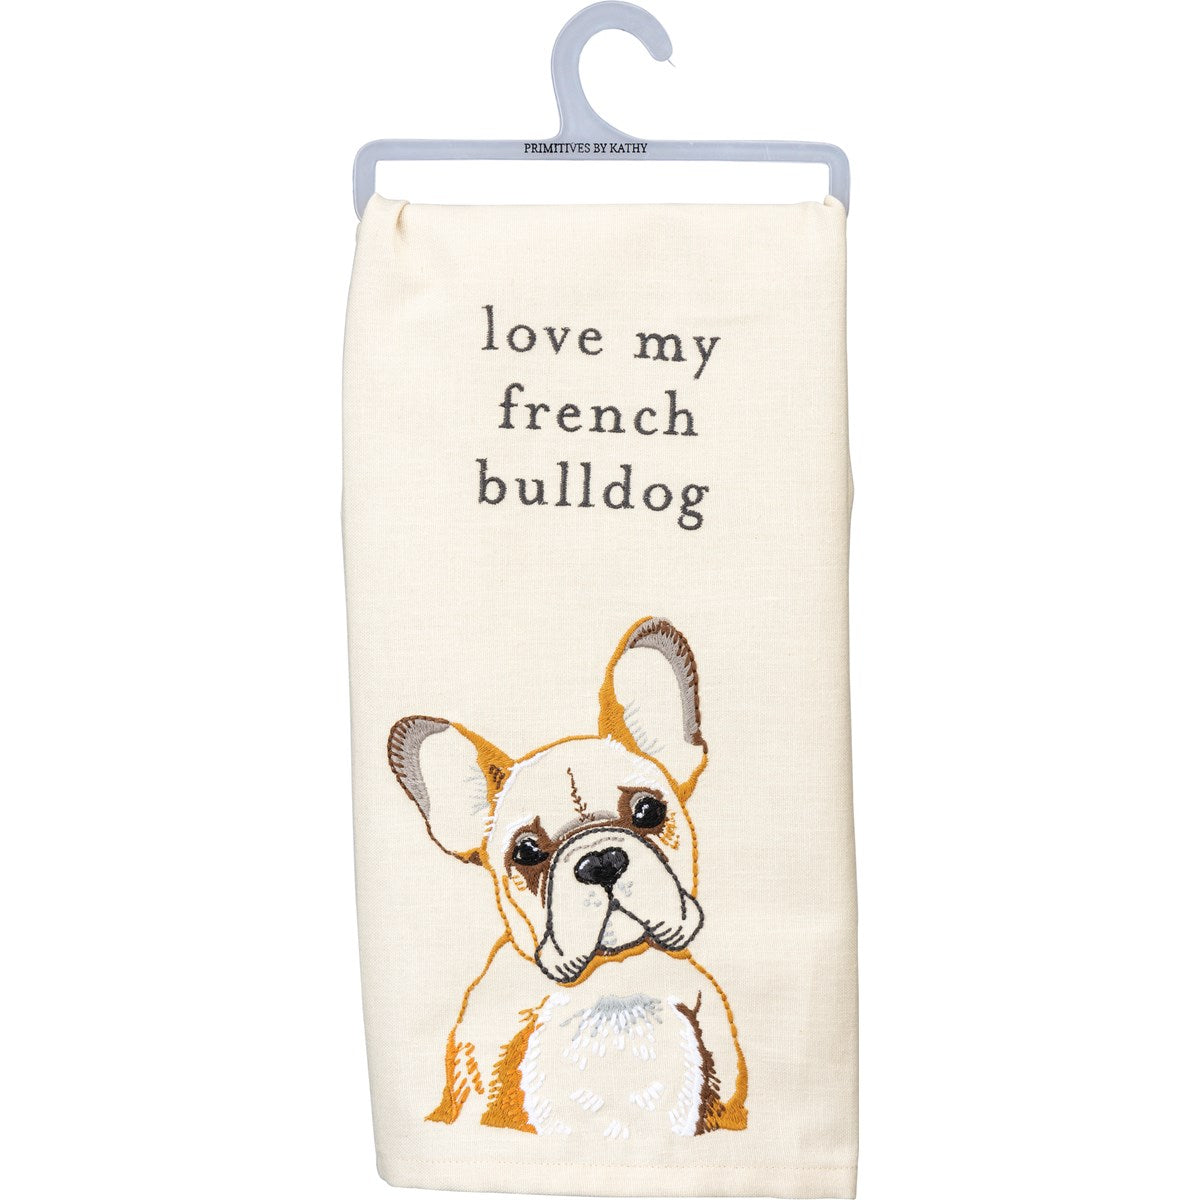 Dish Towel - Love My "___(Specific breed)" - Lake Dog and their people